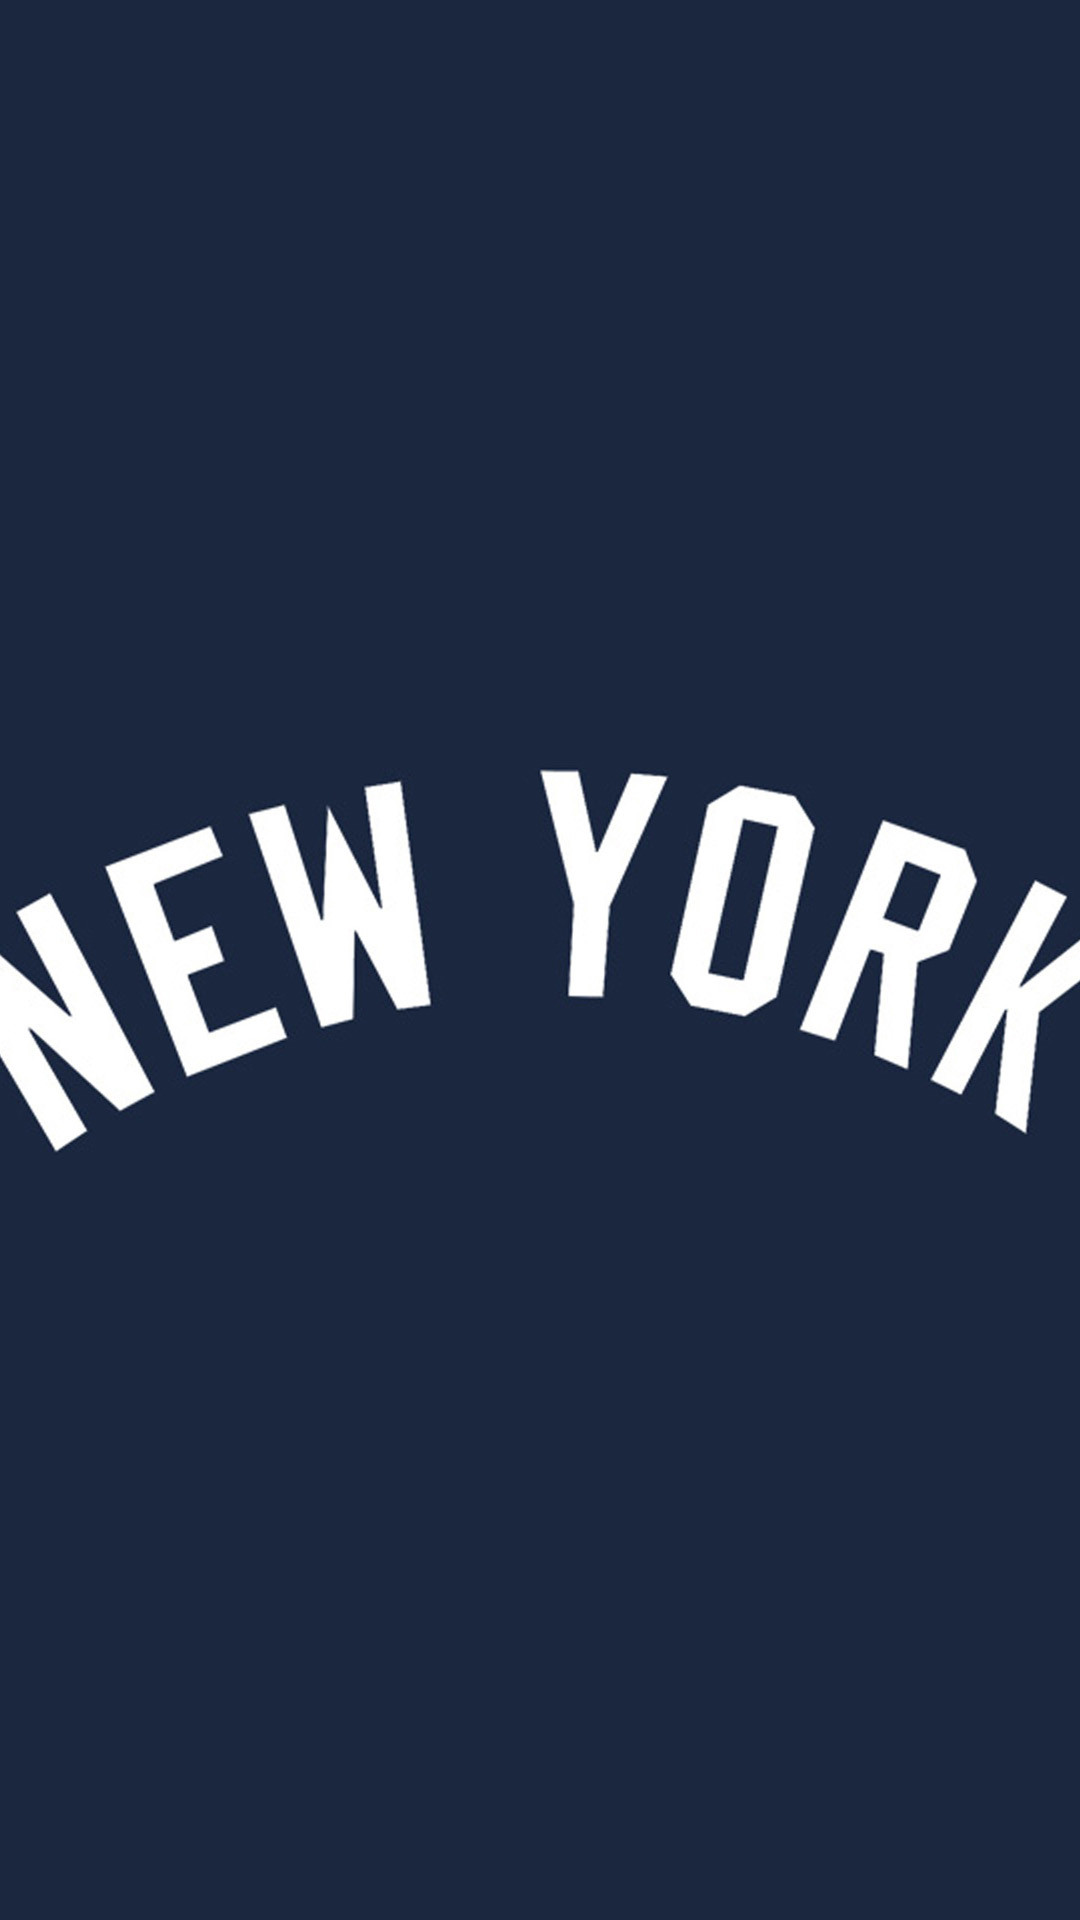 1080x1920 High Quality New York Yankees Wallpapers | Full HD Pictures - HD Wallpapers